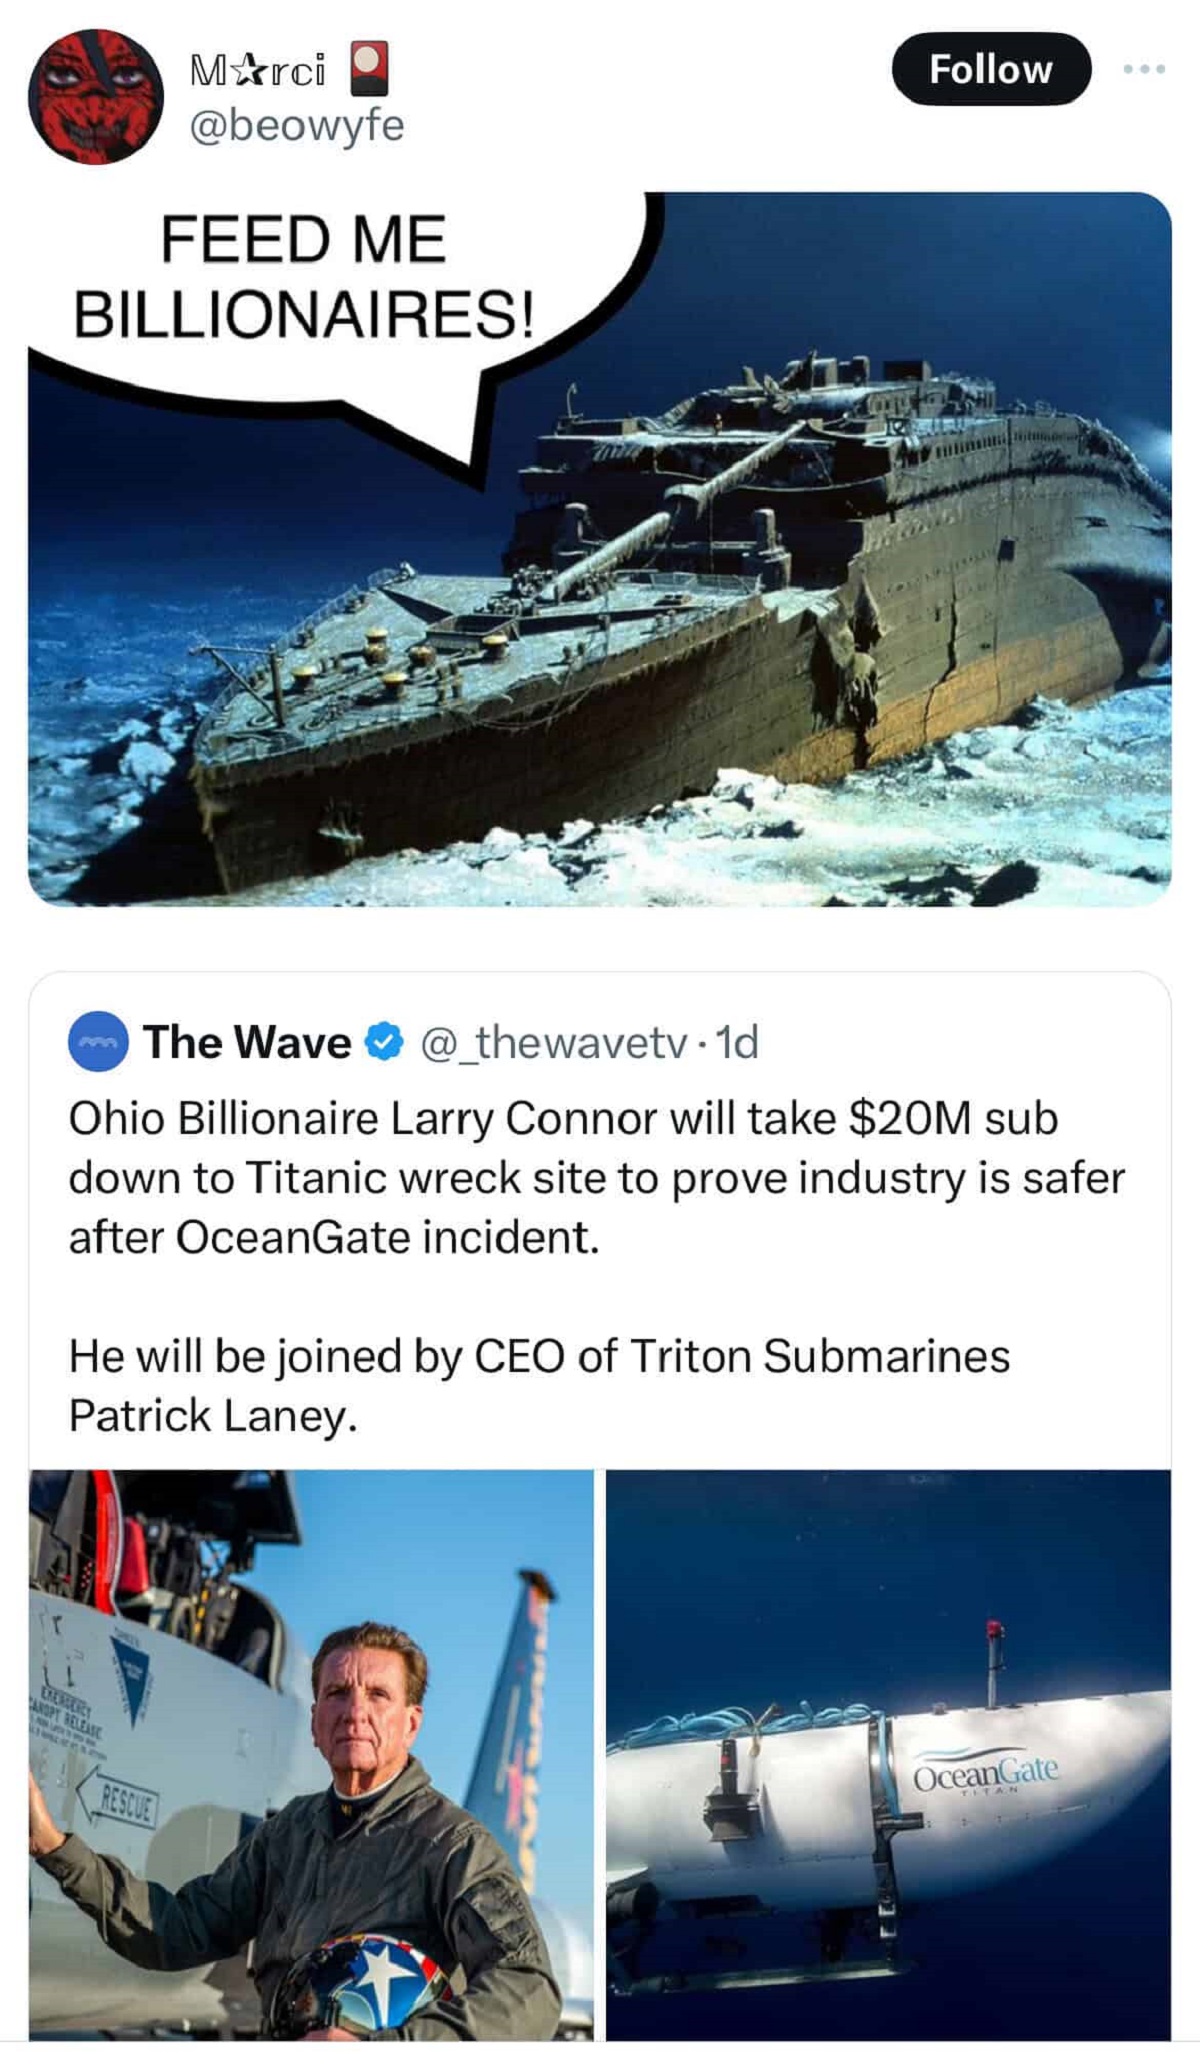 ship wreck titanic - MArci Feed Me Billionaires! The Wave Ohio Billionaire Larry Connor will take $20M sub down to Titanic wreck site to prove industry is safer after OceanGate incident. He will be joined by Ceo of Triton Submarines Patrick Laney. Ocul